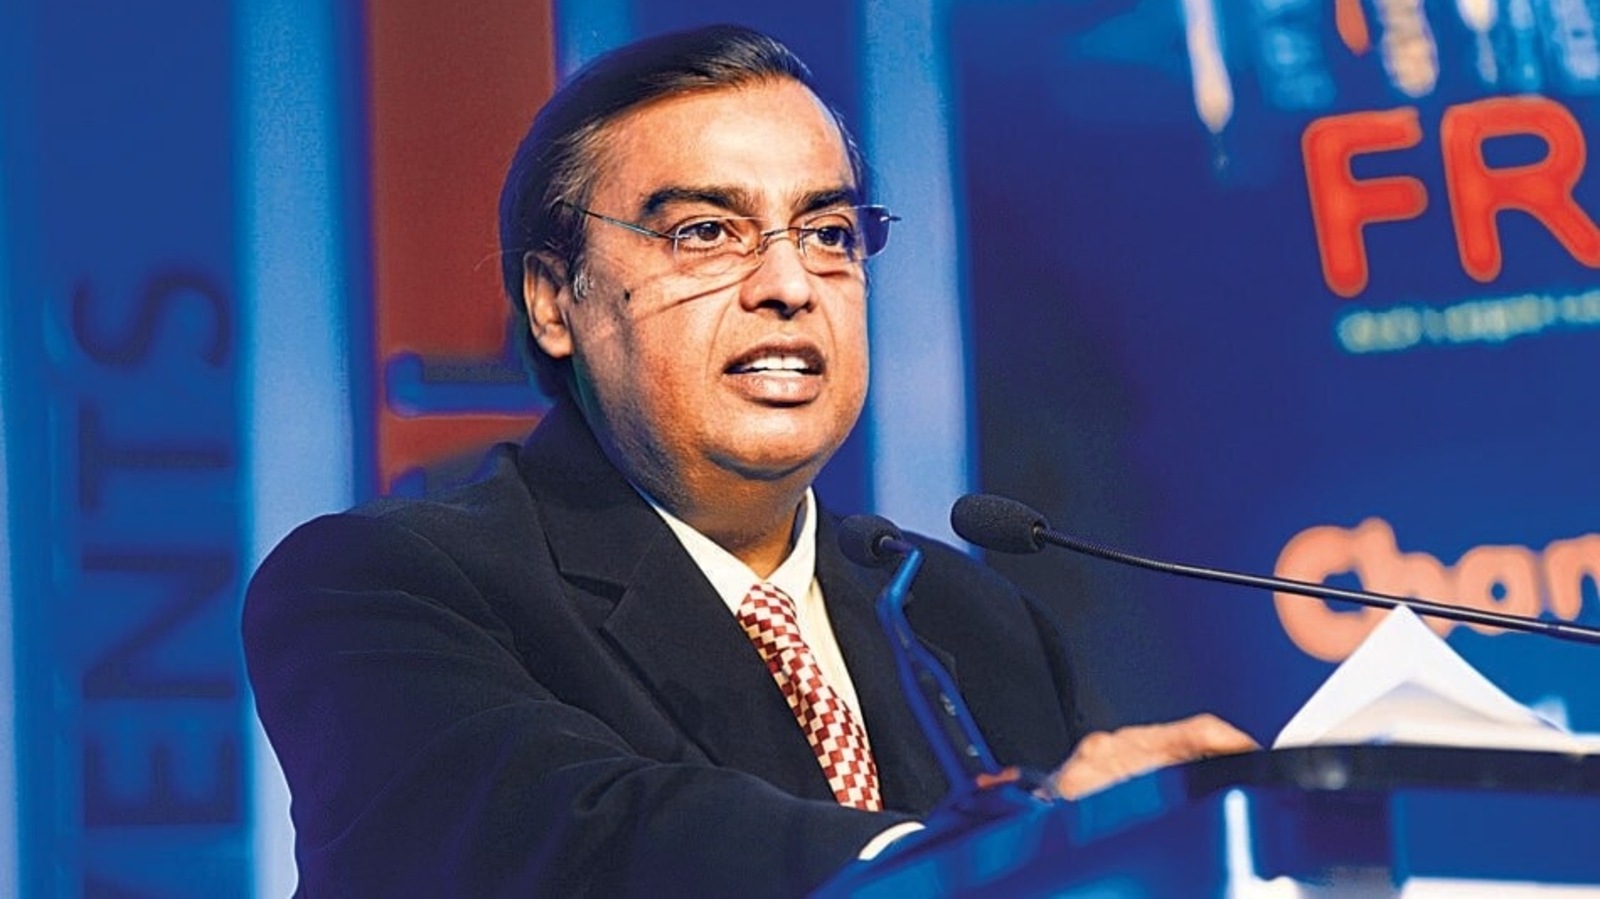 Reliance AGM 2022 LIVE: 5G rollout, Ambani succession announcements expected